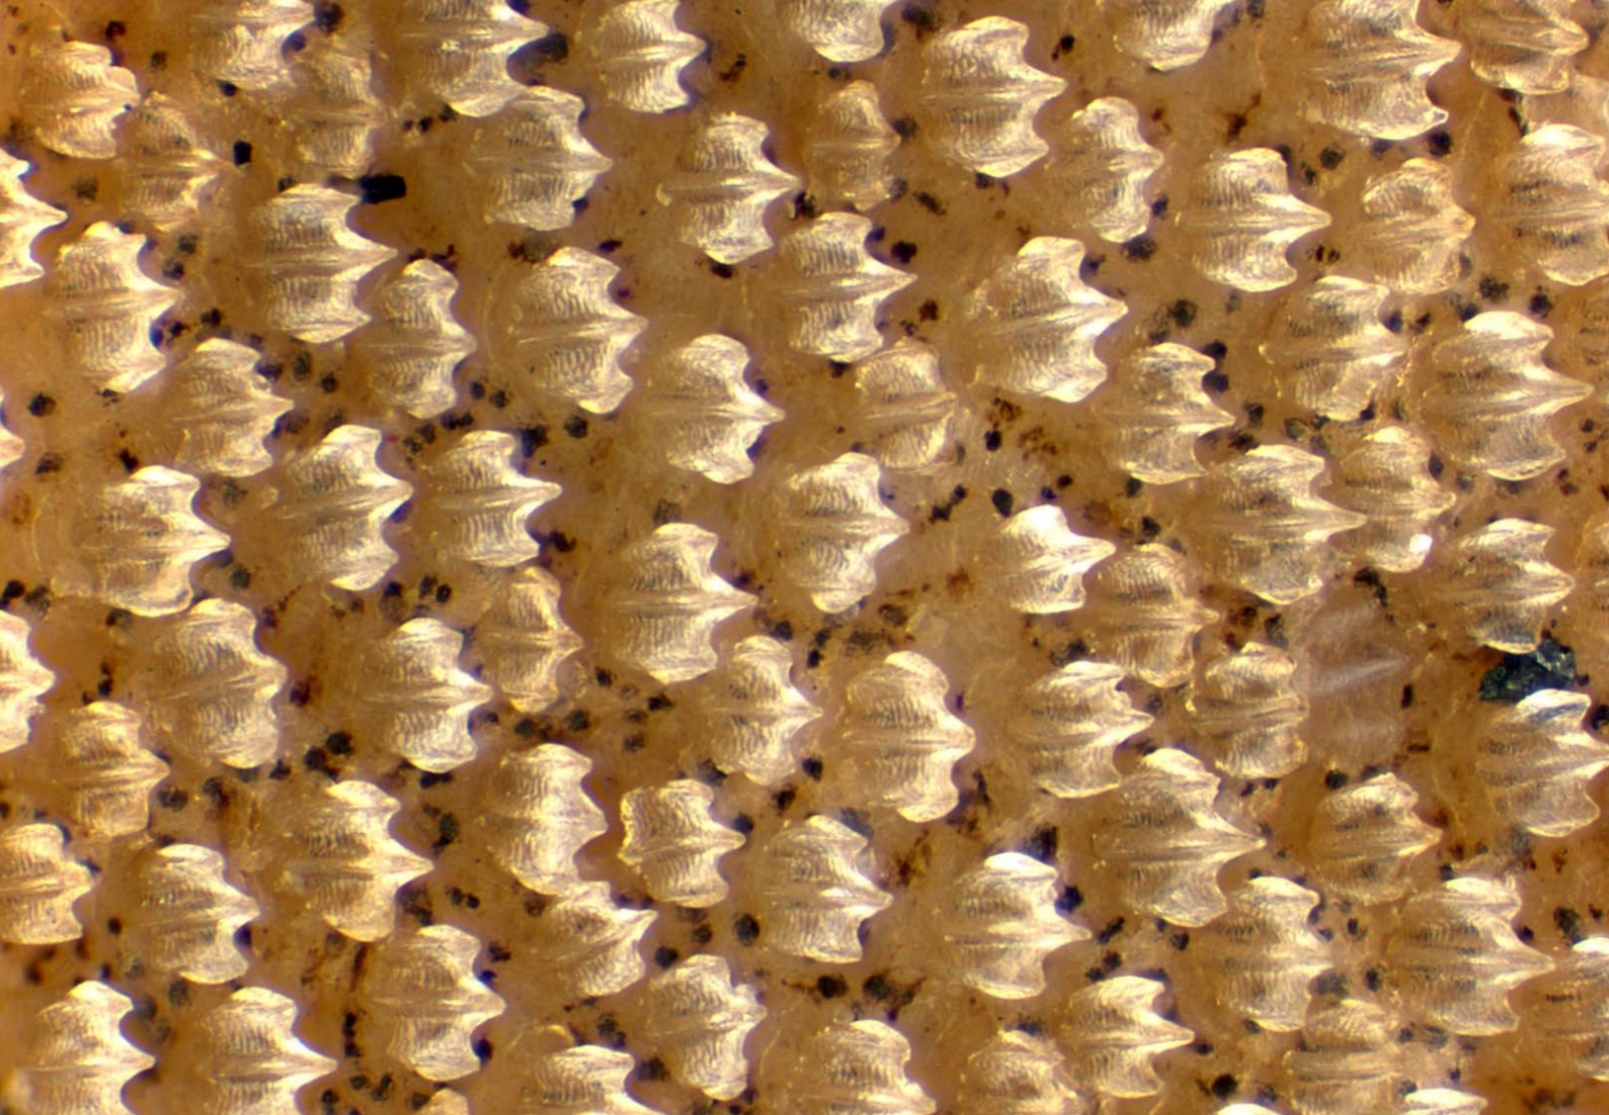 A microscopic image of preserved shark skin, showing many small tooth-like structures covering the skin